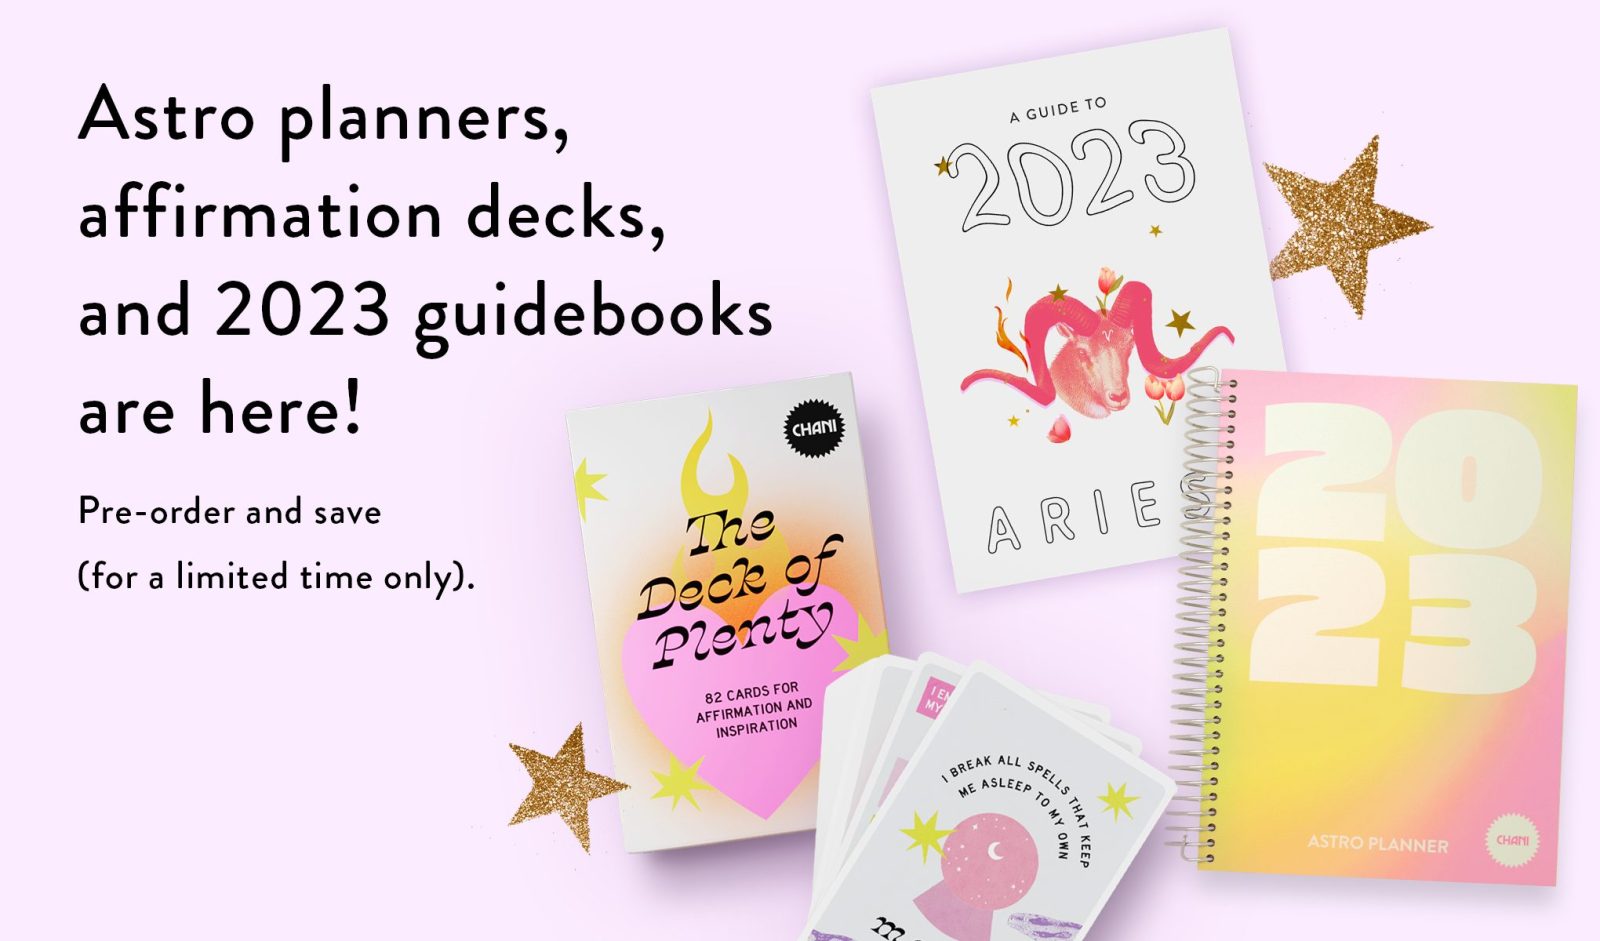 Image of 2023 Astro planner, Deck of Plenty, and Guidebooks